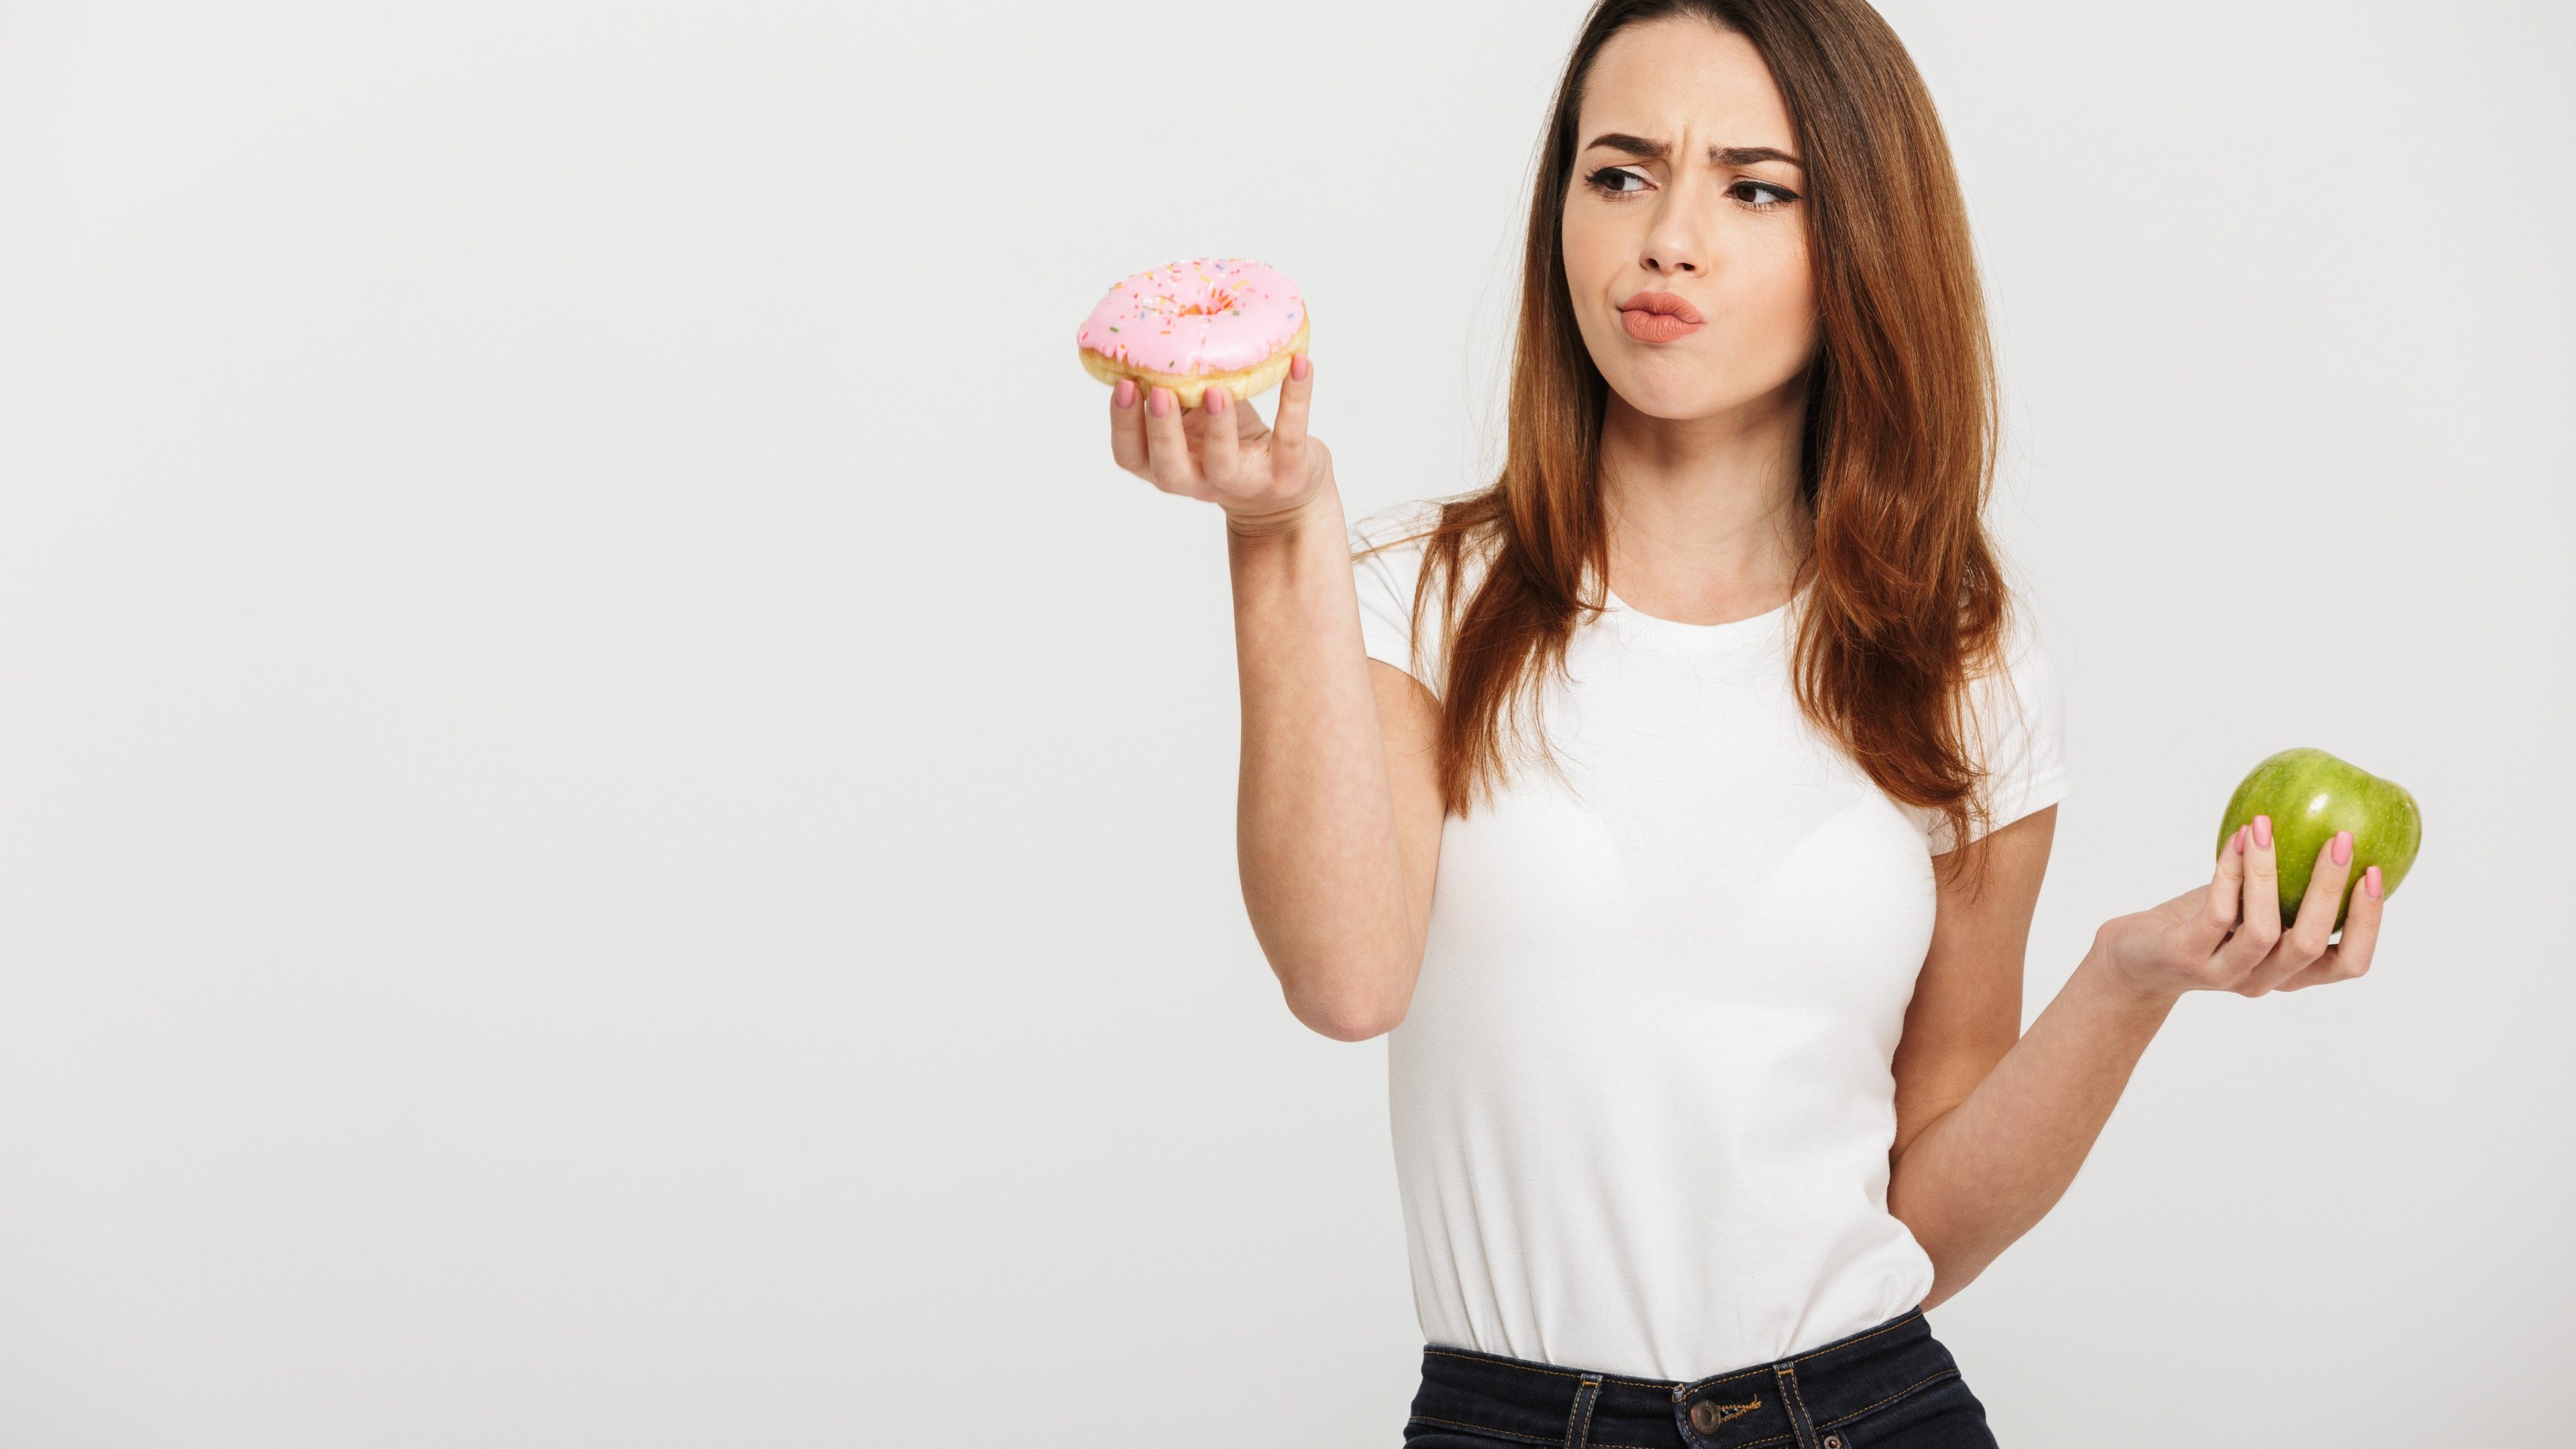 Portrait of a confused young woman choosing between donut and green apple isolated over white background